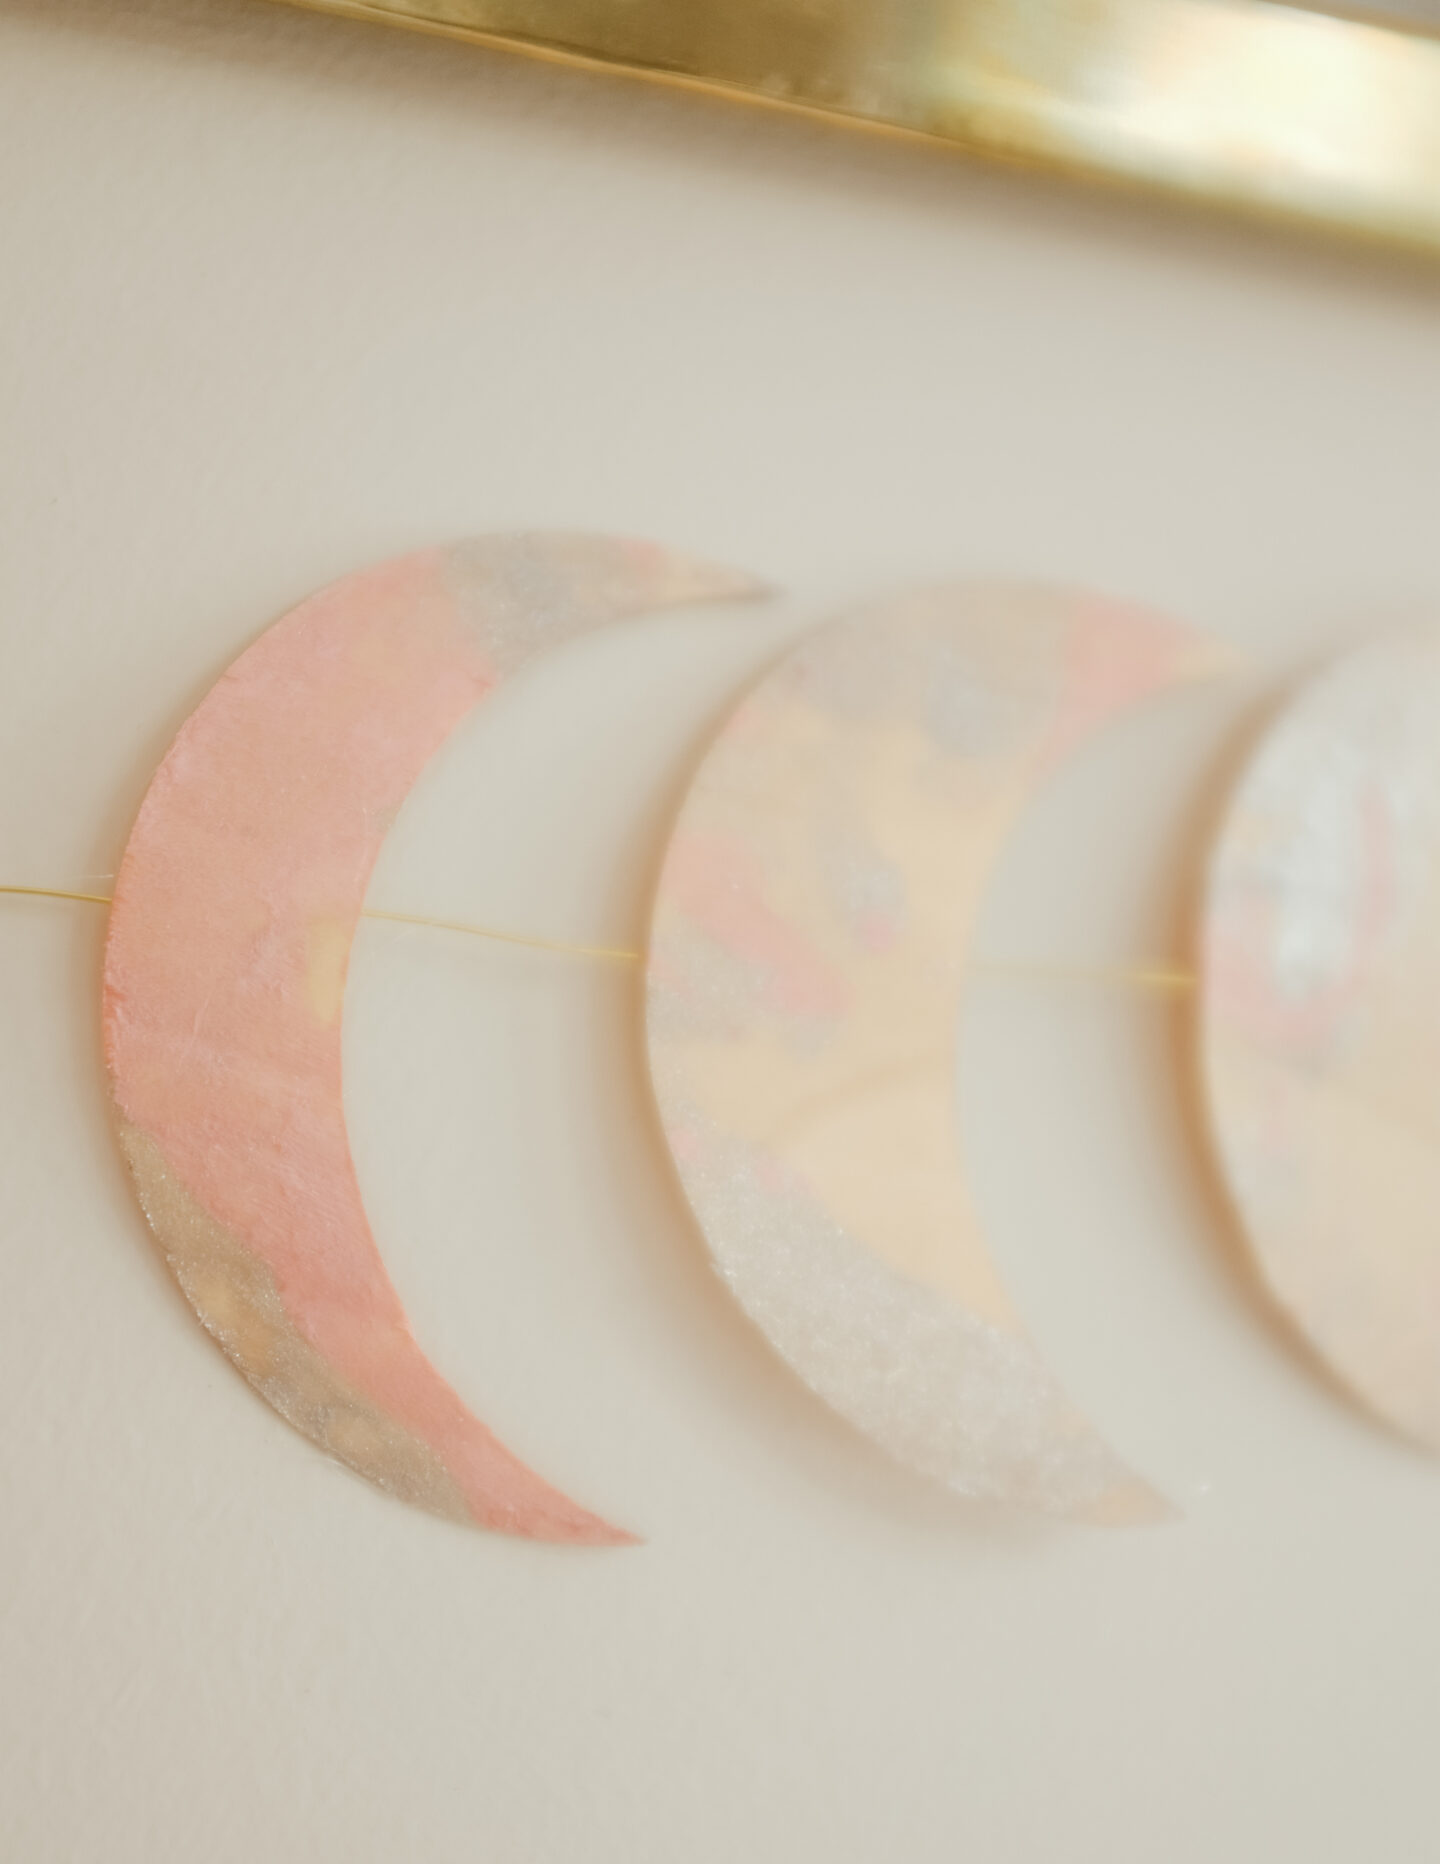 Phases of the moon cricut DIY project